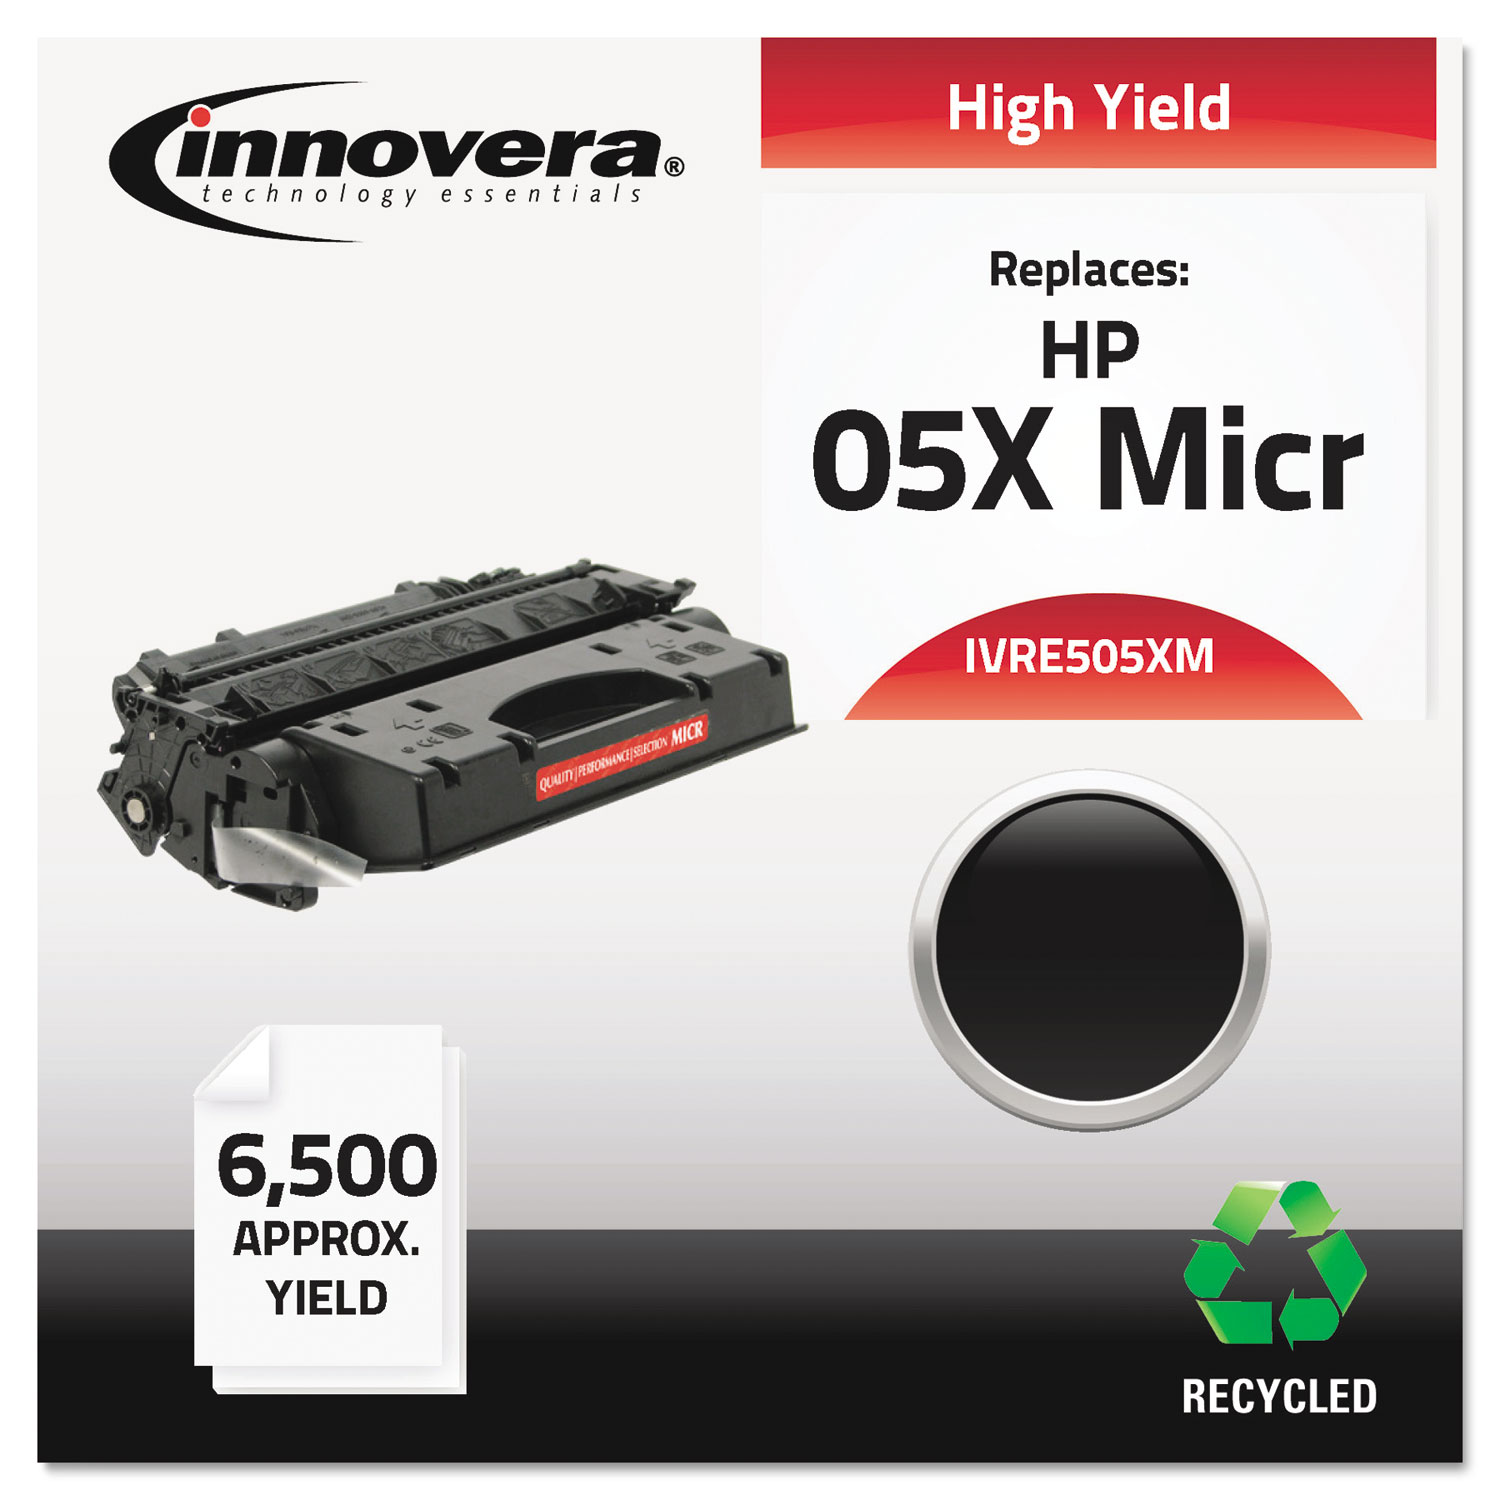  Innovera IVRE505XM Remanufactured CE505X(M) (05XM) High-Yield MICR Toner, 6500 Page-Yield, Black (IVRE505XM) 